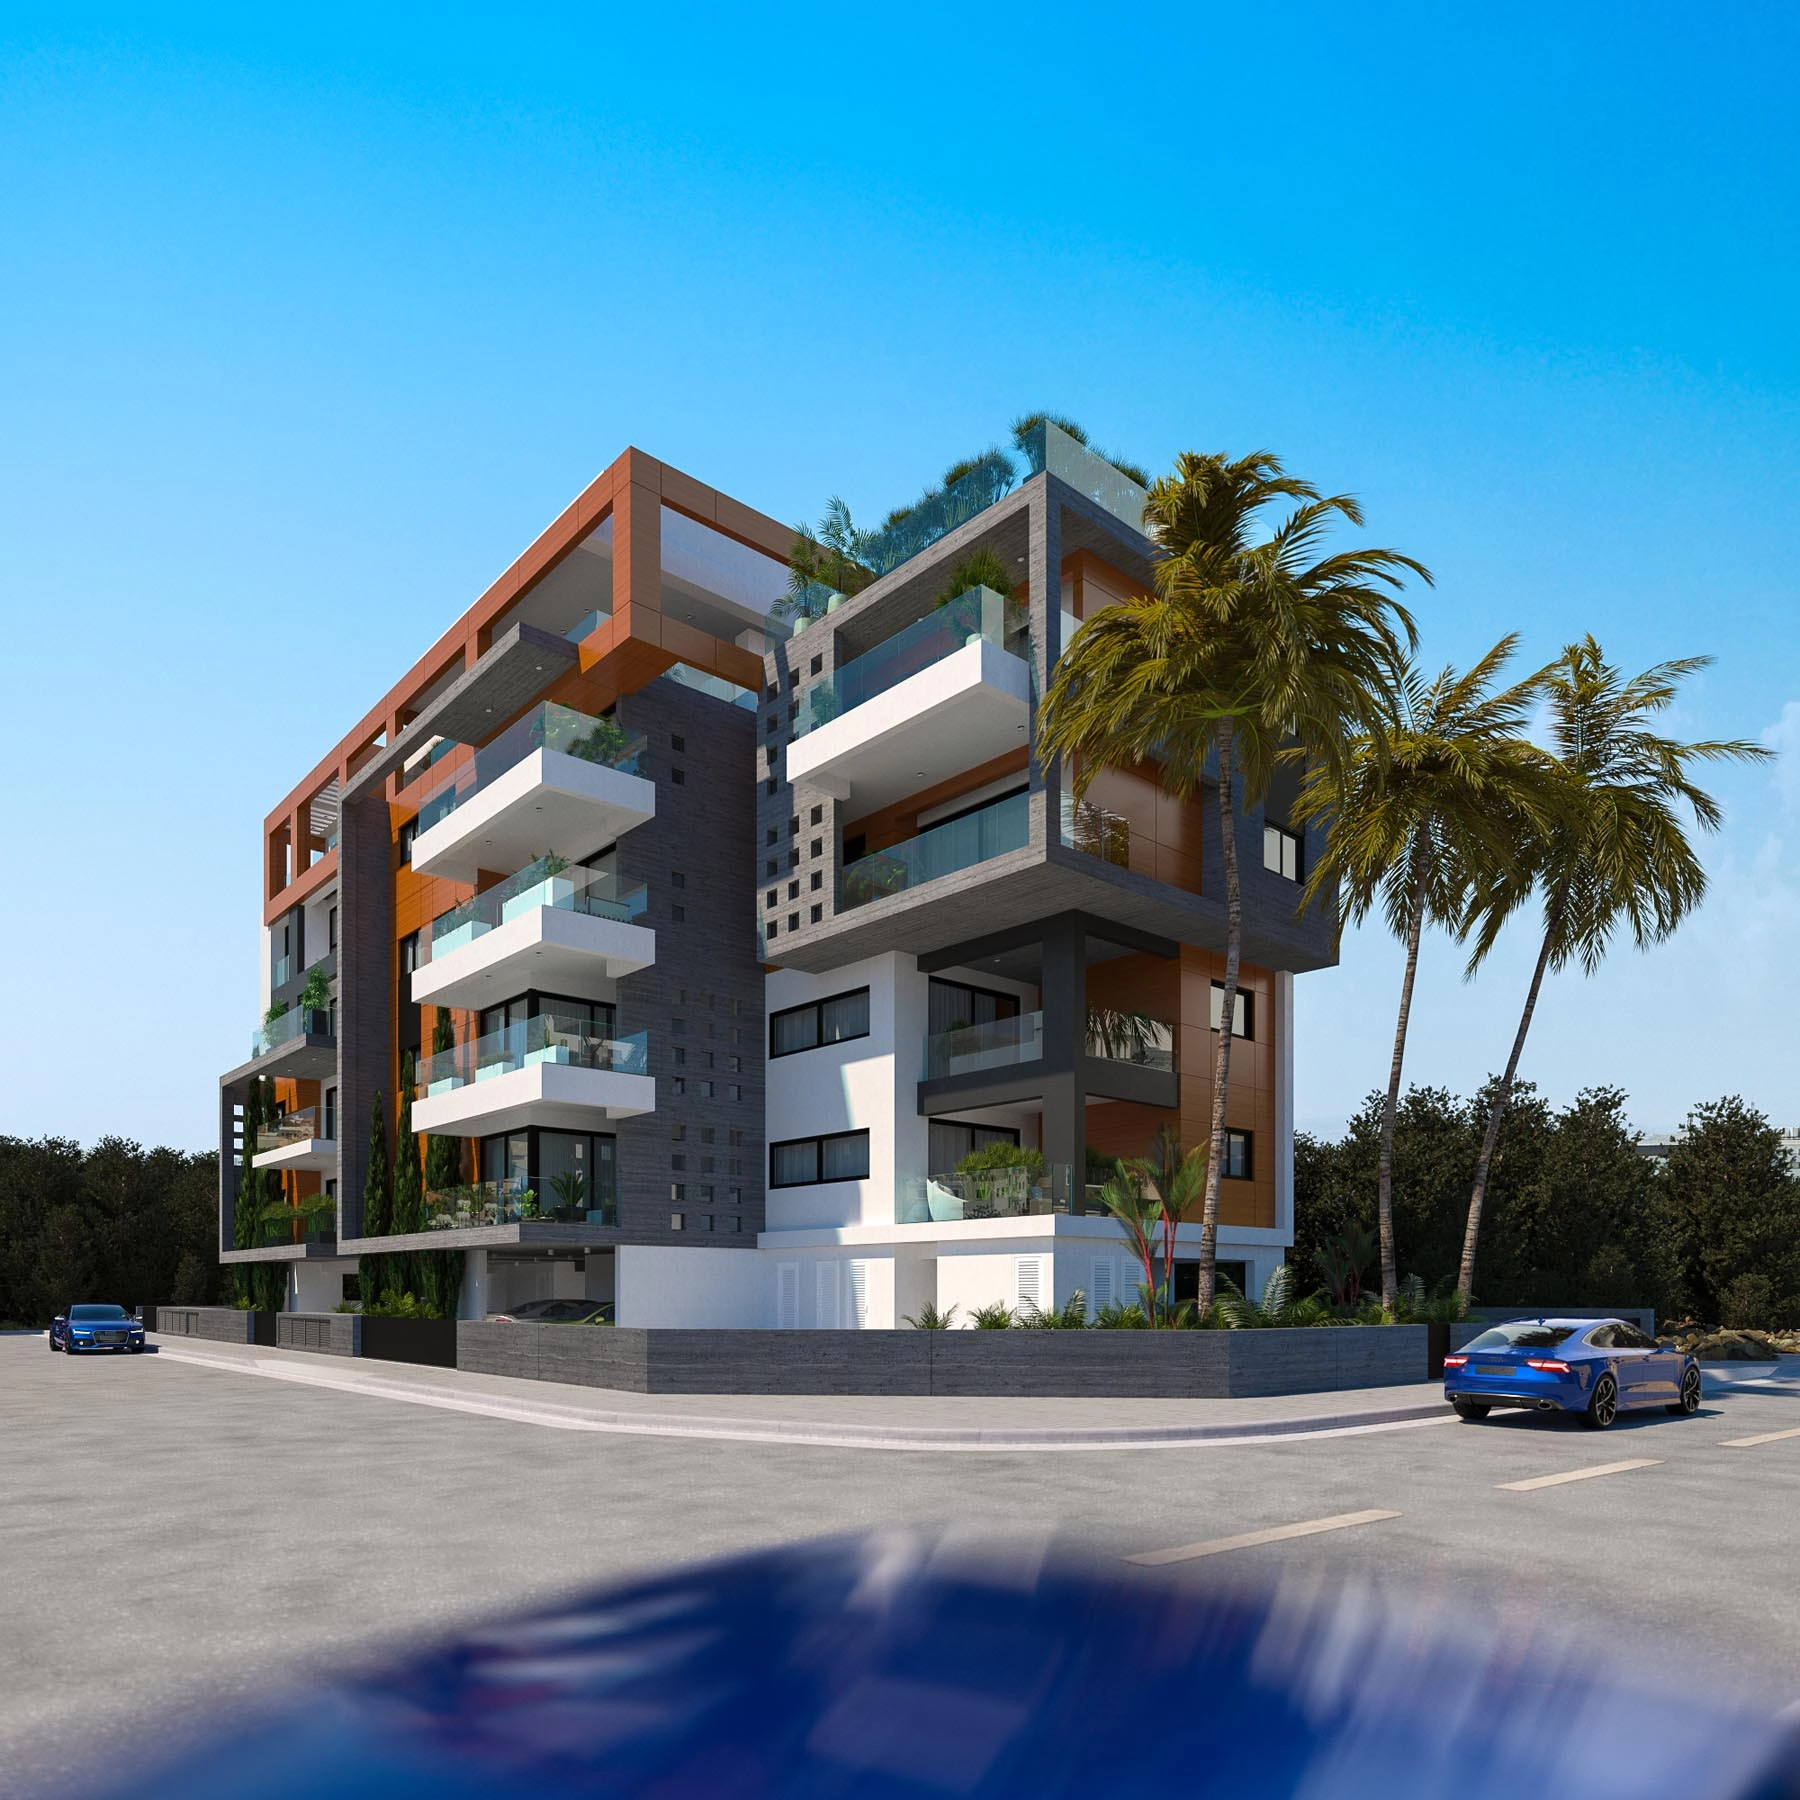 4 Bedroom Apartment for Sale in Limassol – Agios Ioannis